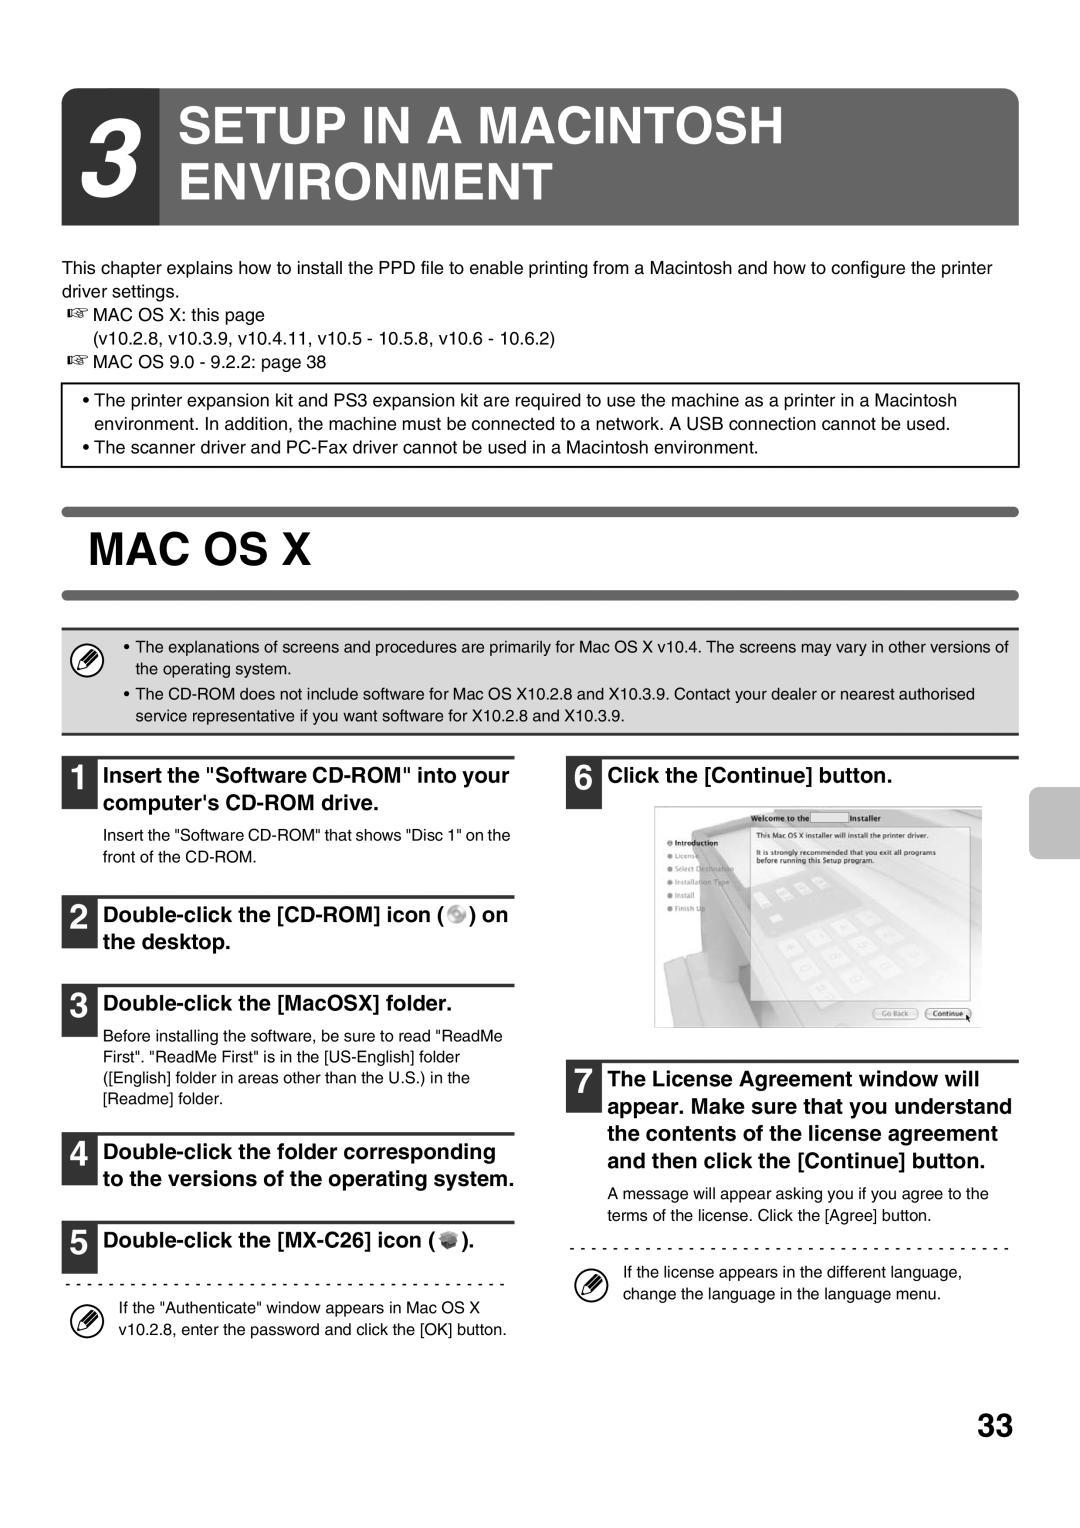 Sharp MX-2010U SETUP IN A MACINTOSH 3 ENVIRONMENT, Mac Os, Insert the Software CD-ROM into your computers CD-ROM drive 